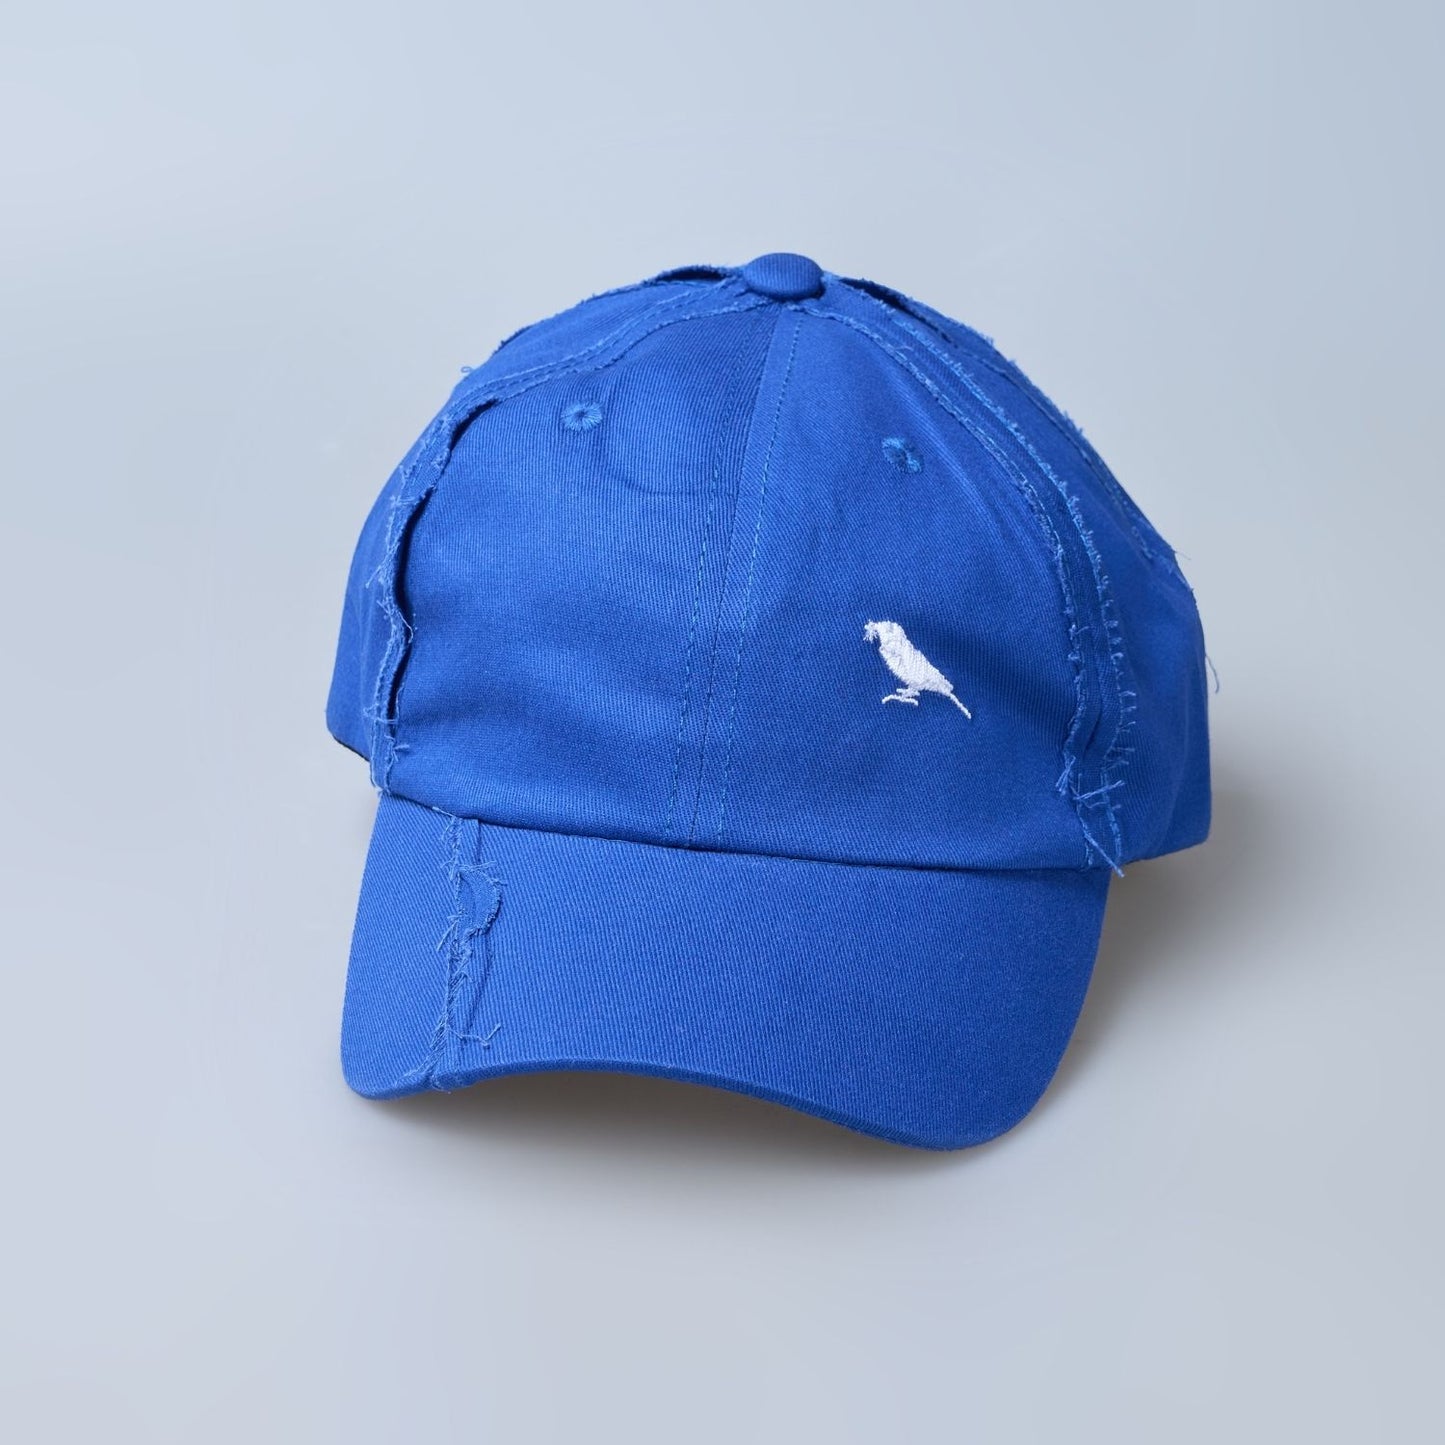 Blue colored, wide brim cap for men with adjustable strap, front view.